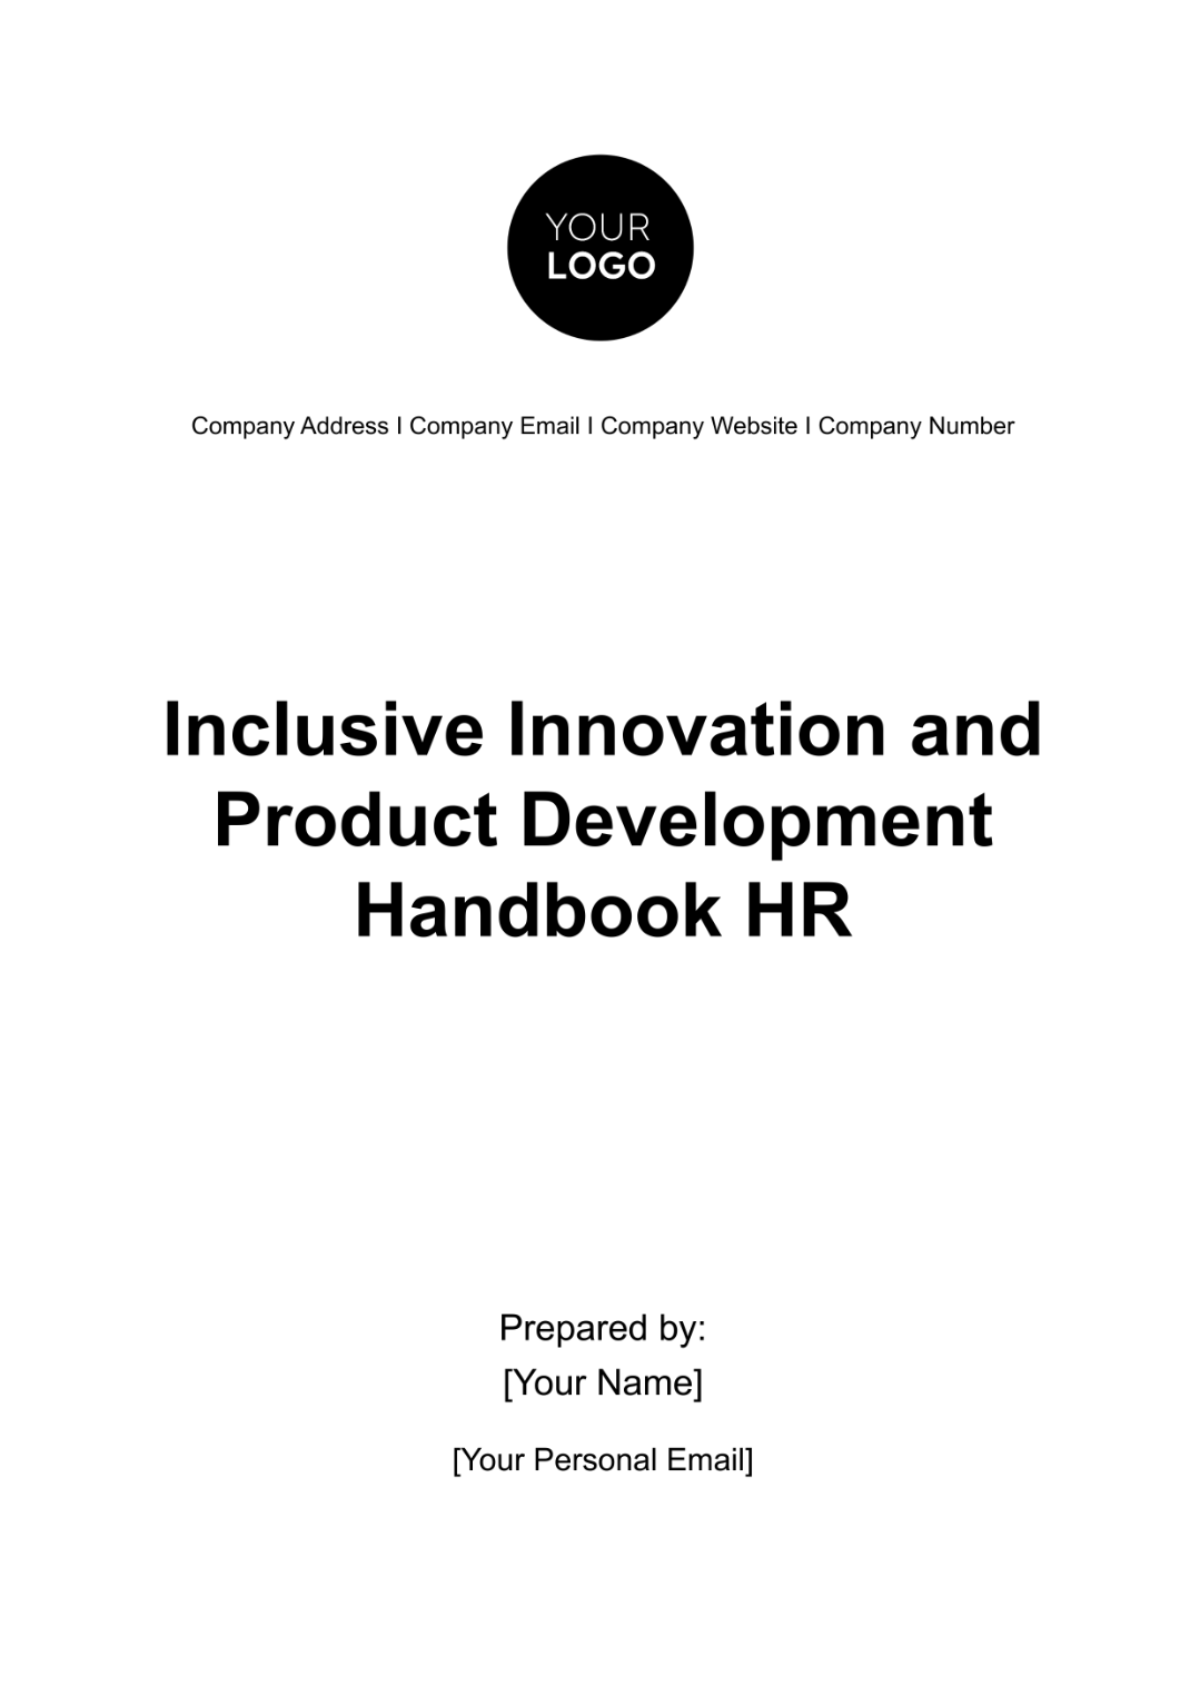 Inclusive Innovation and Product Development Handbook HR Template